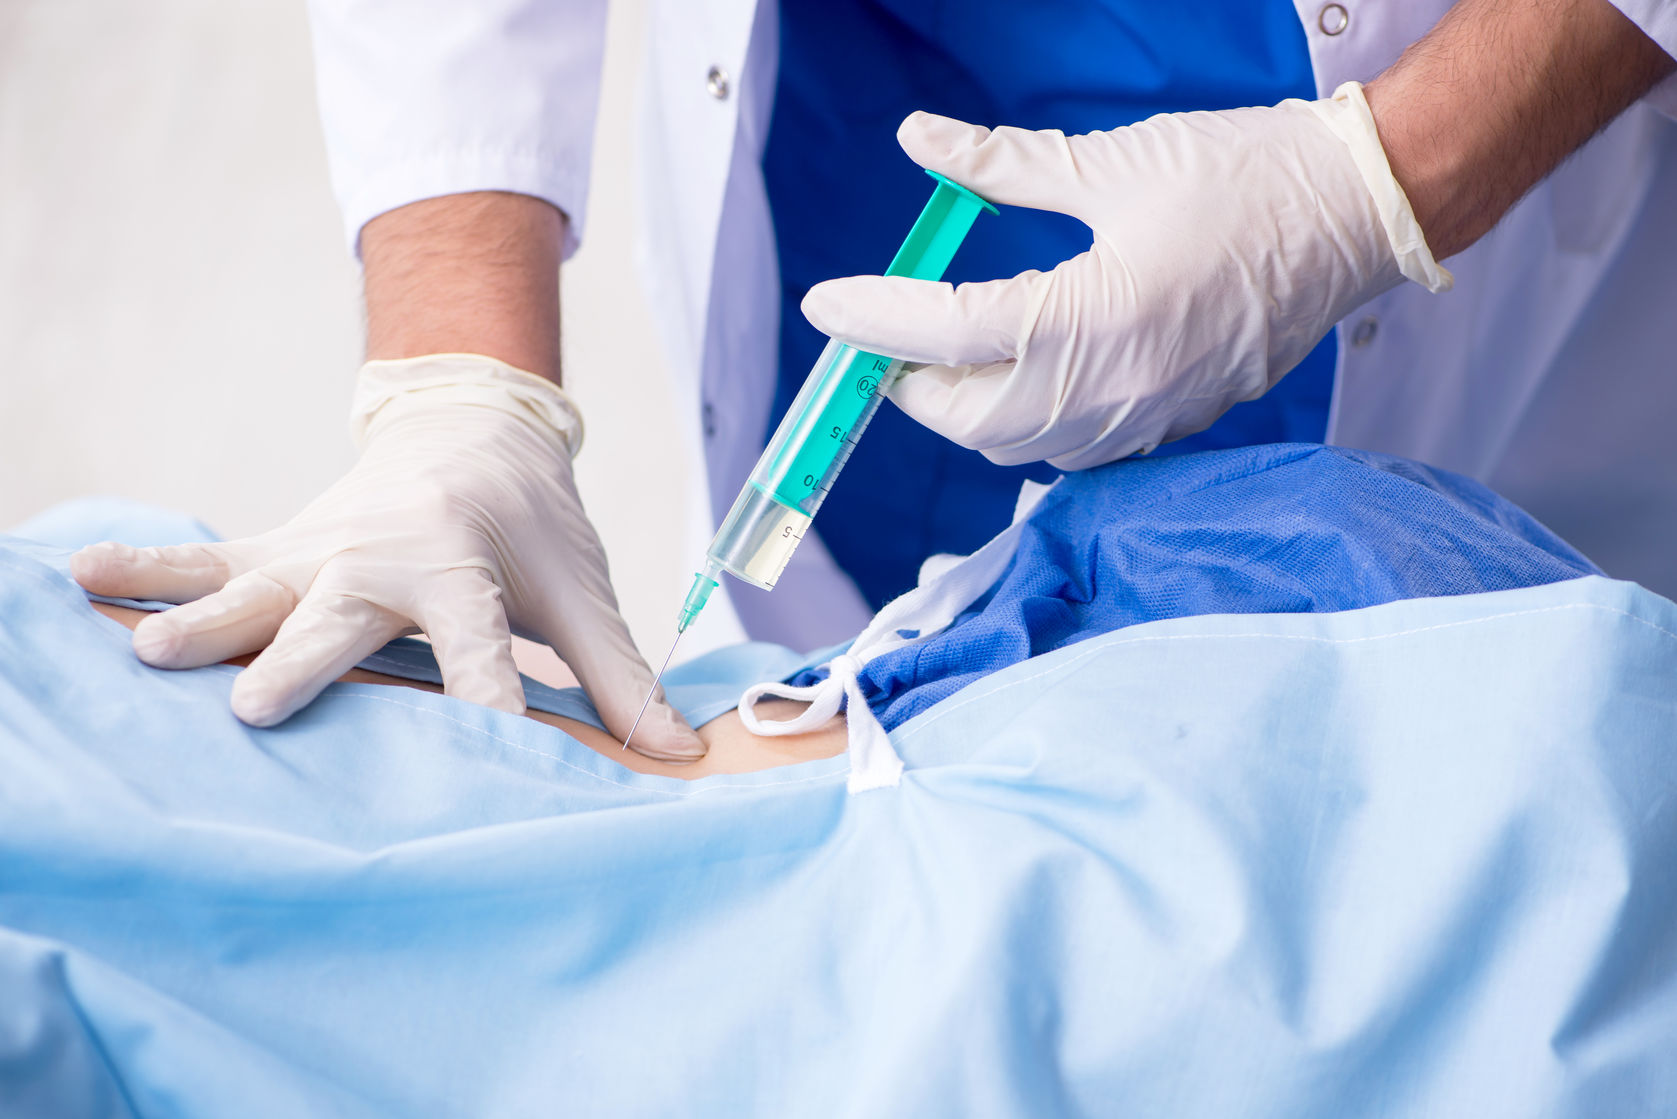 Epidural Injections’ Uses in Treating Various Conditions